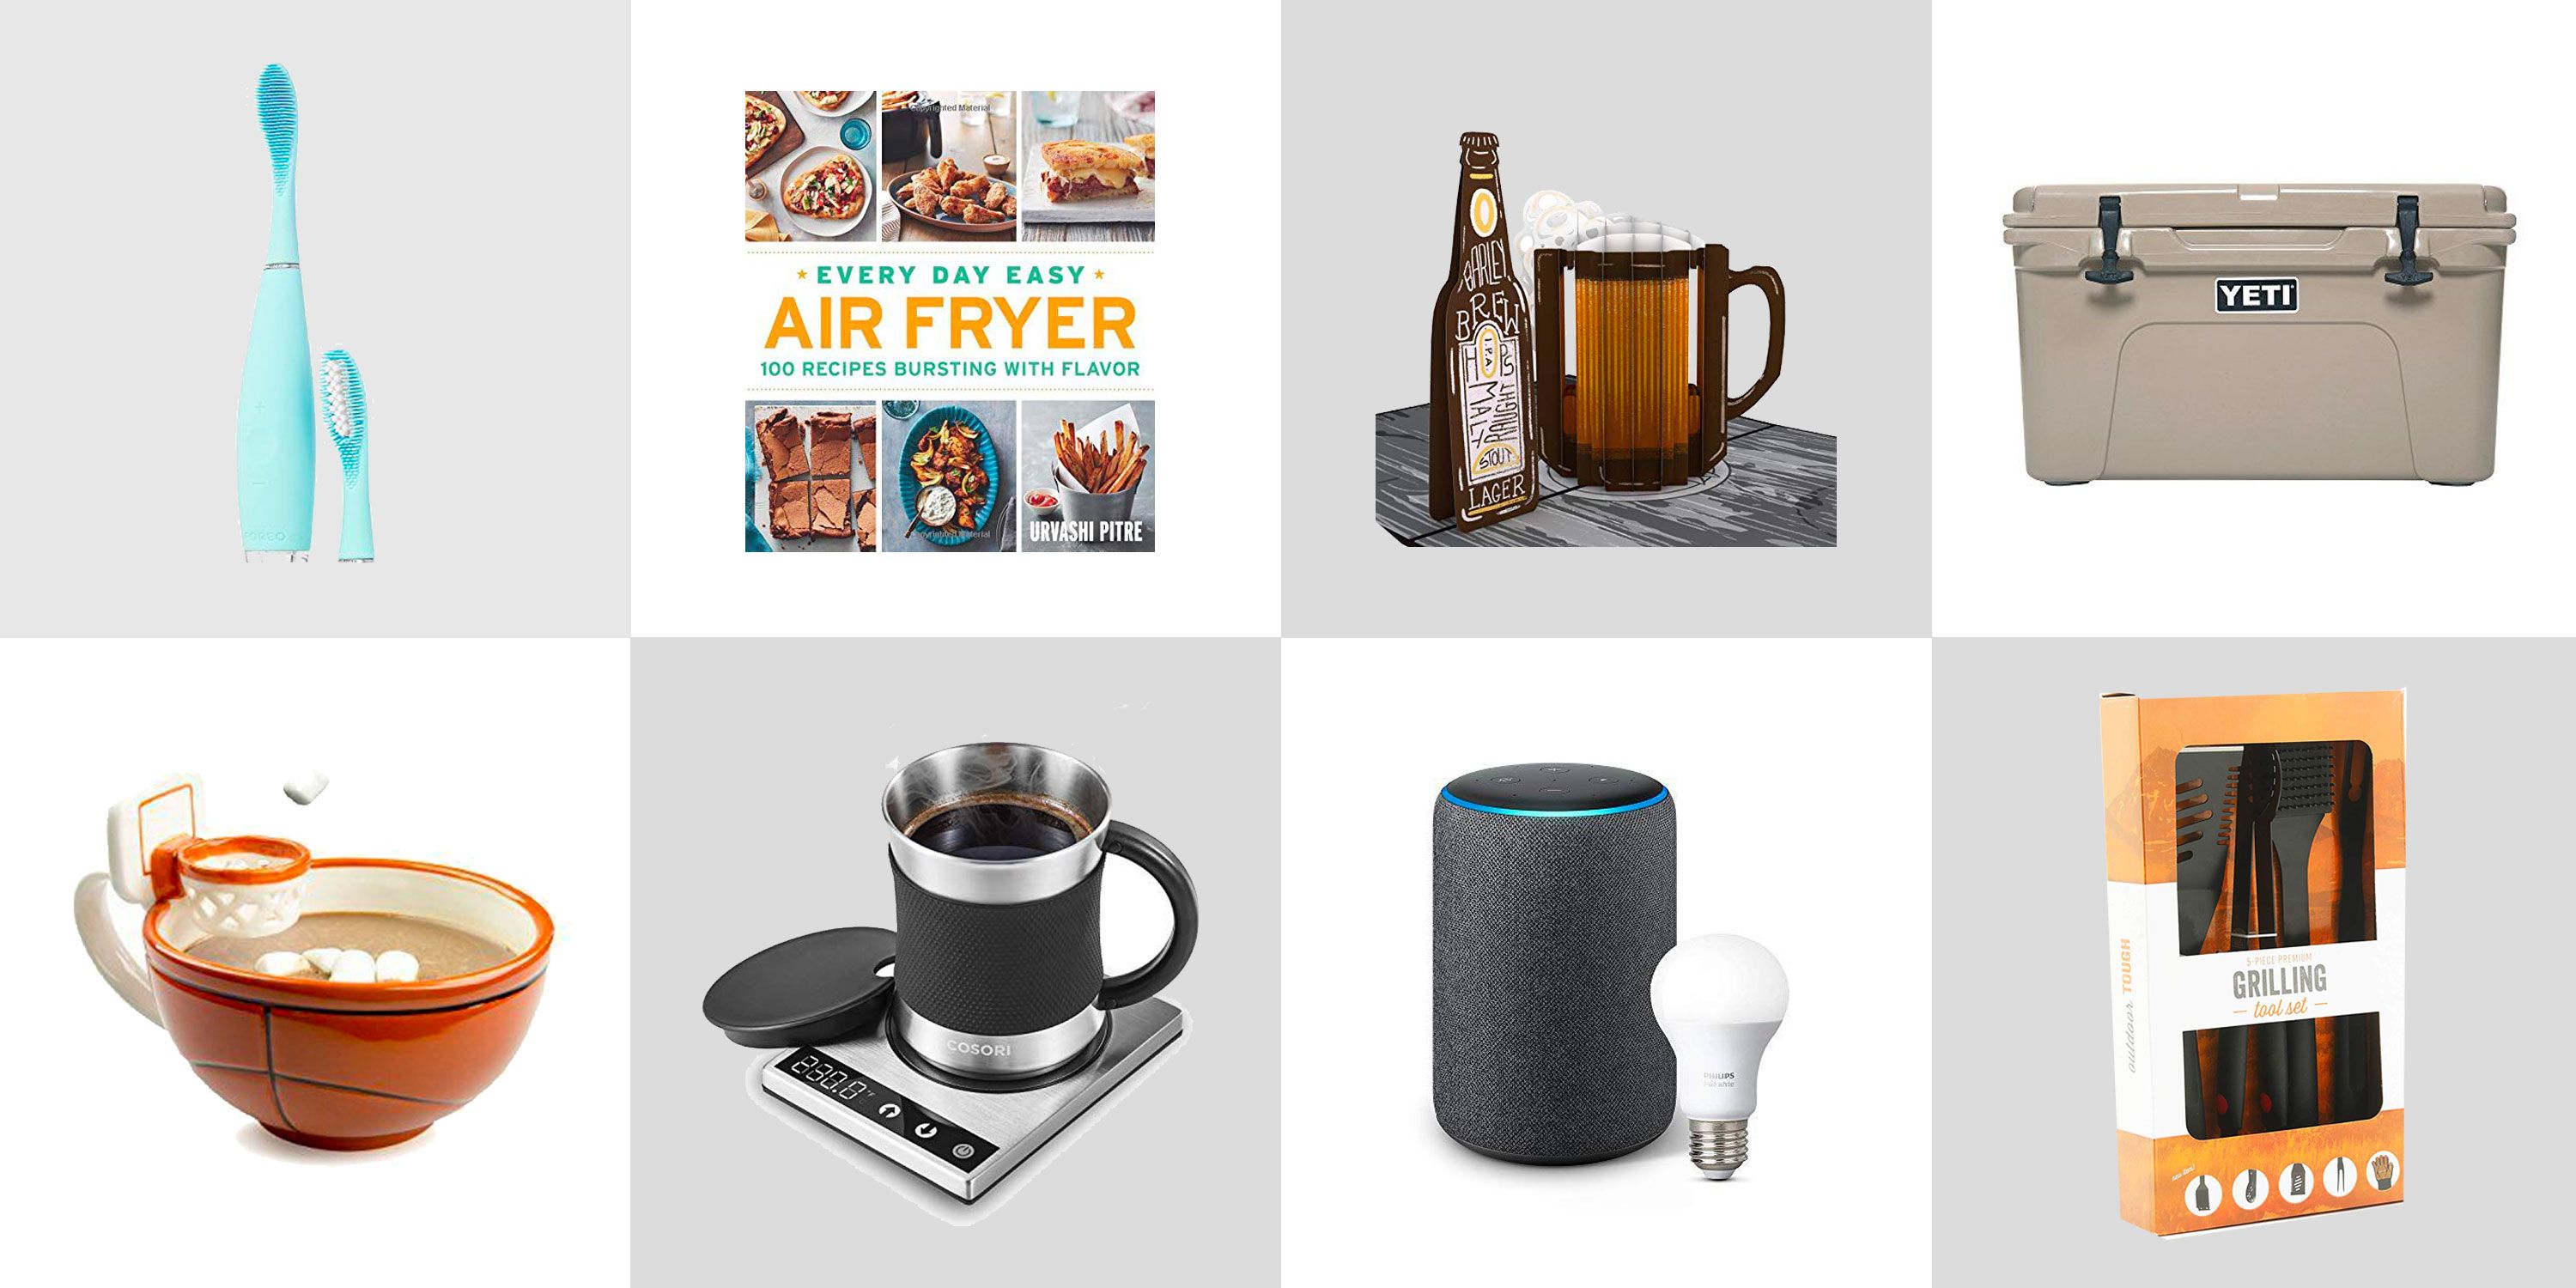 Amazon Prime Father's Day Gifts 2019 